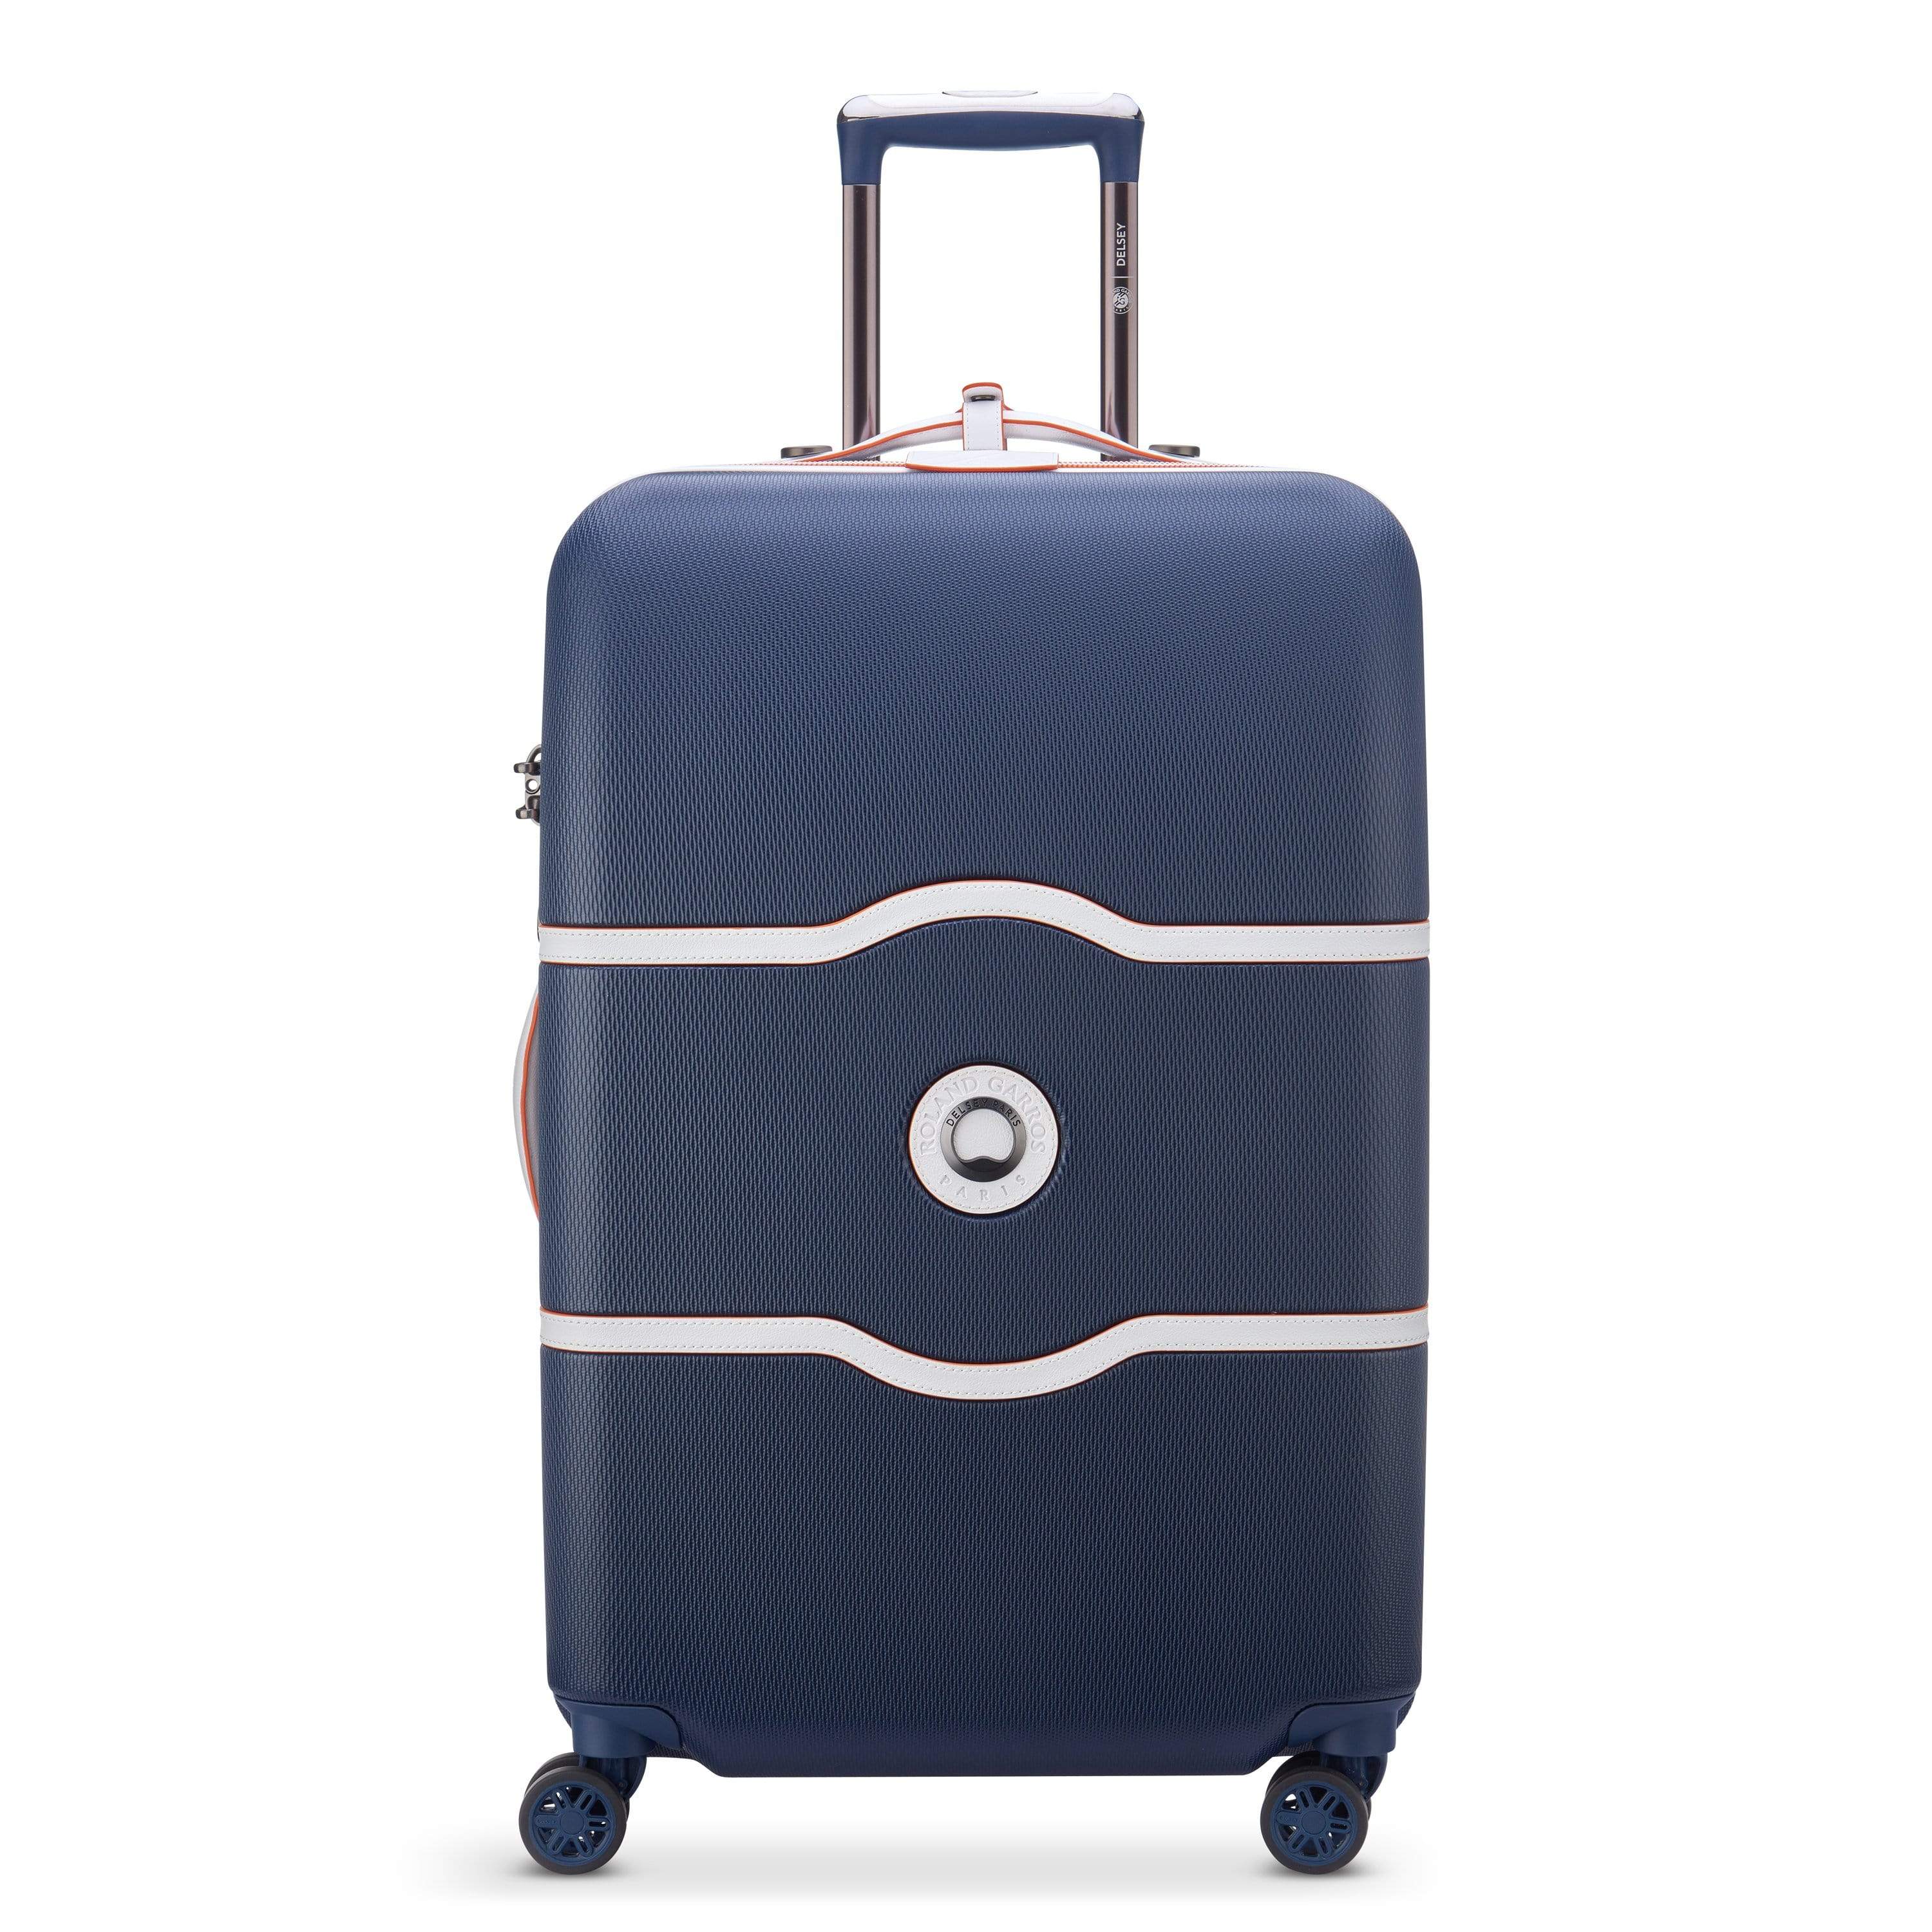 DELSEY CHATELET AIR 67 4DW TR CASE NAVY RG 00167281802 NAVY